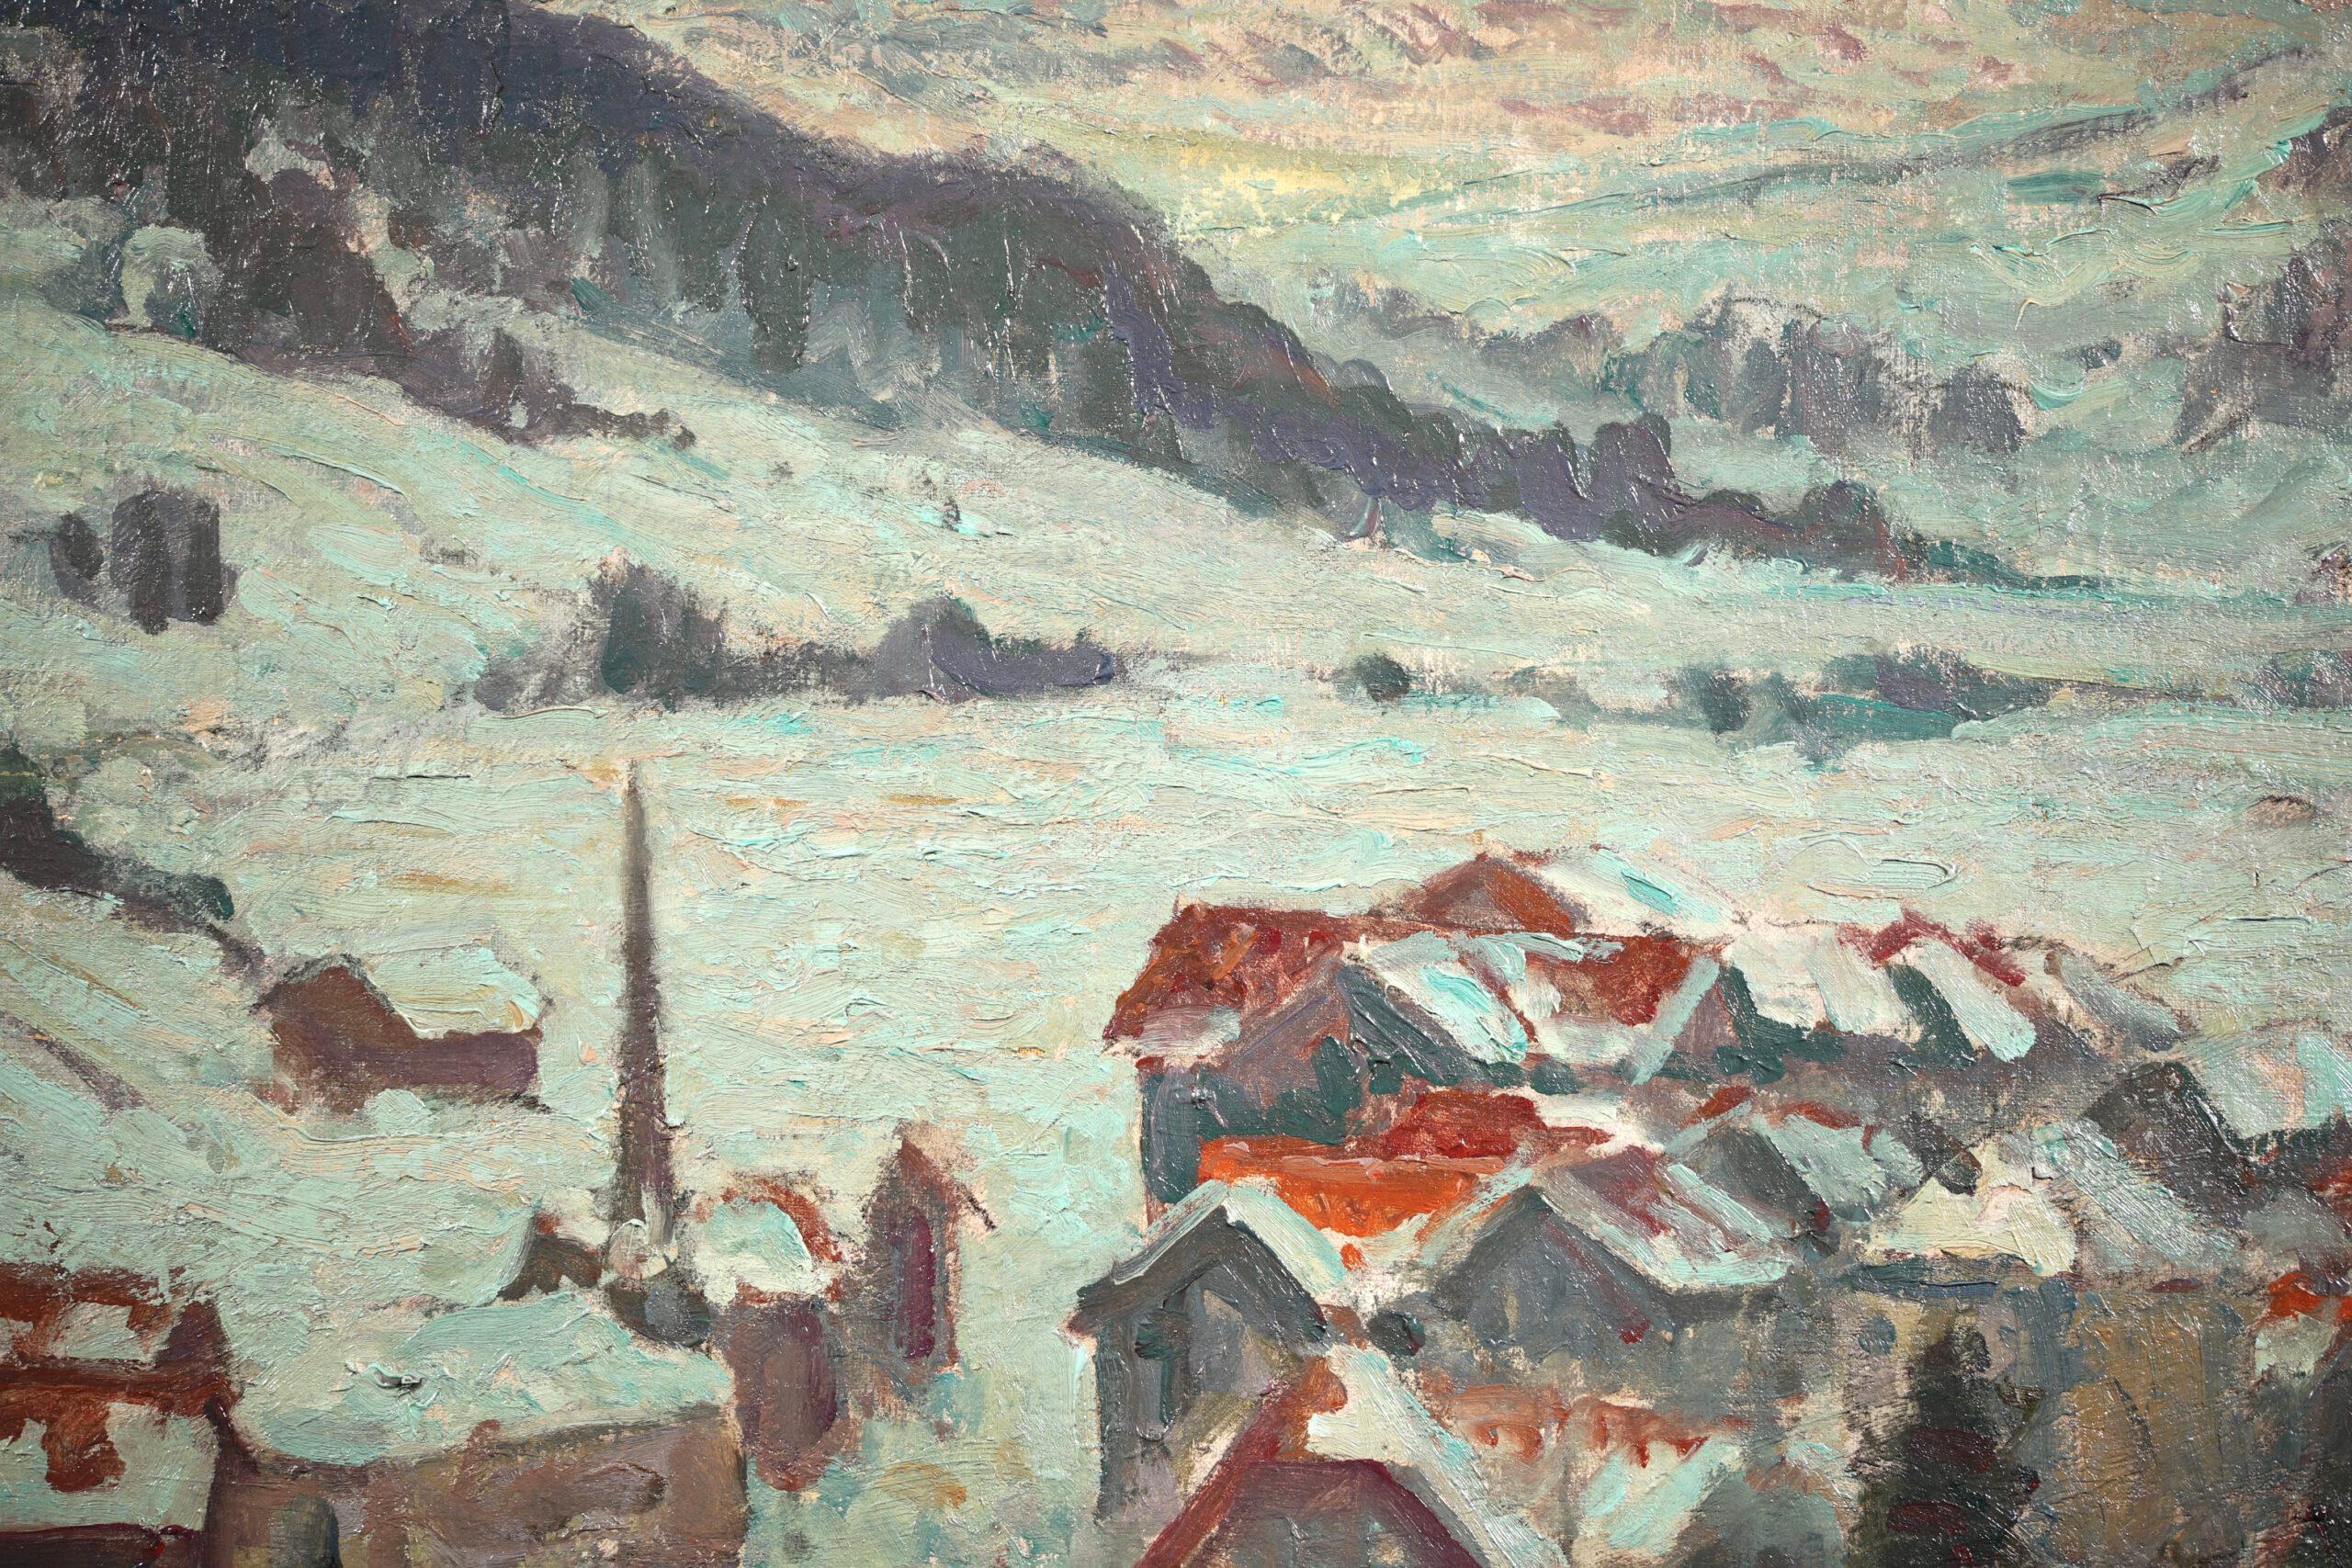 Winter Snow - Gstaad - Impressionist Landscape Oil by William Samuel Horton For Sale 3